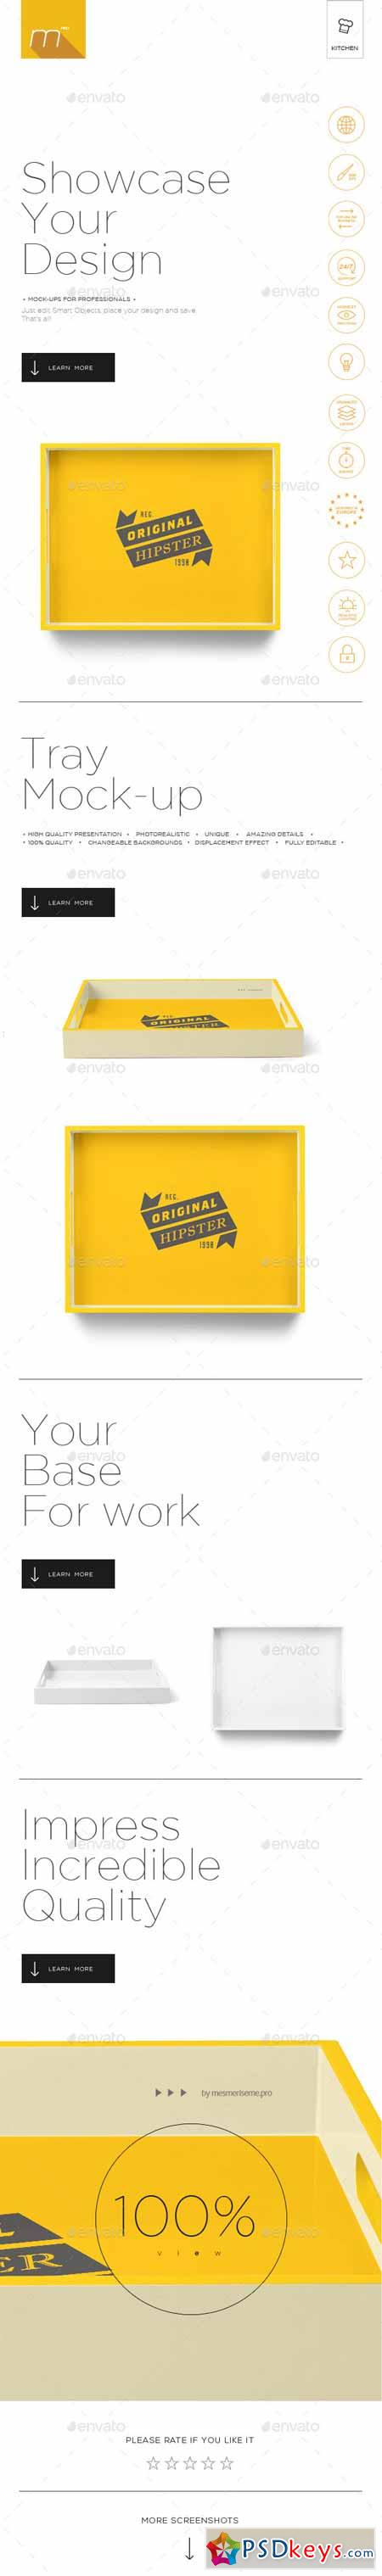 Download Tray Mock-up 11477673 » Free Download Photoshop Vector Stock image Via Torrent Zippyshare From ...